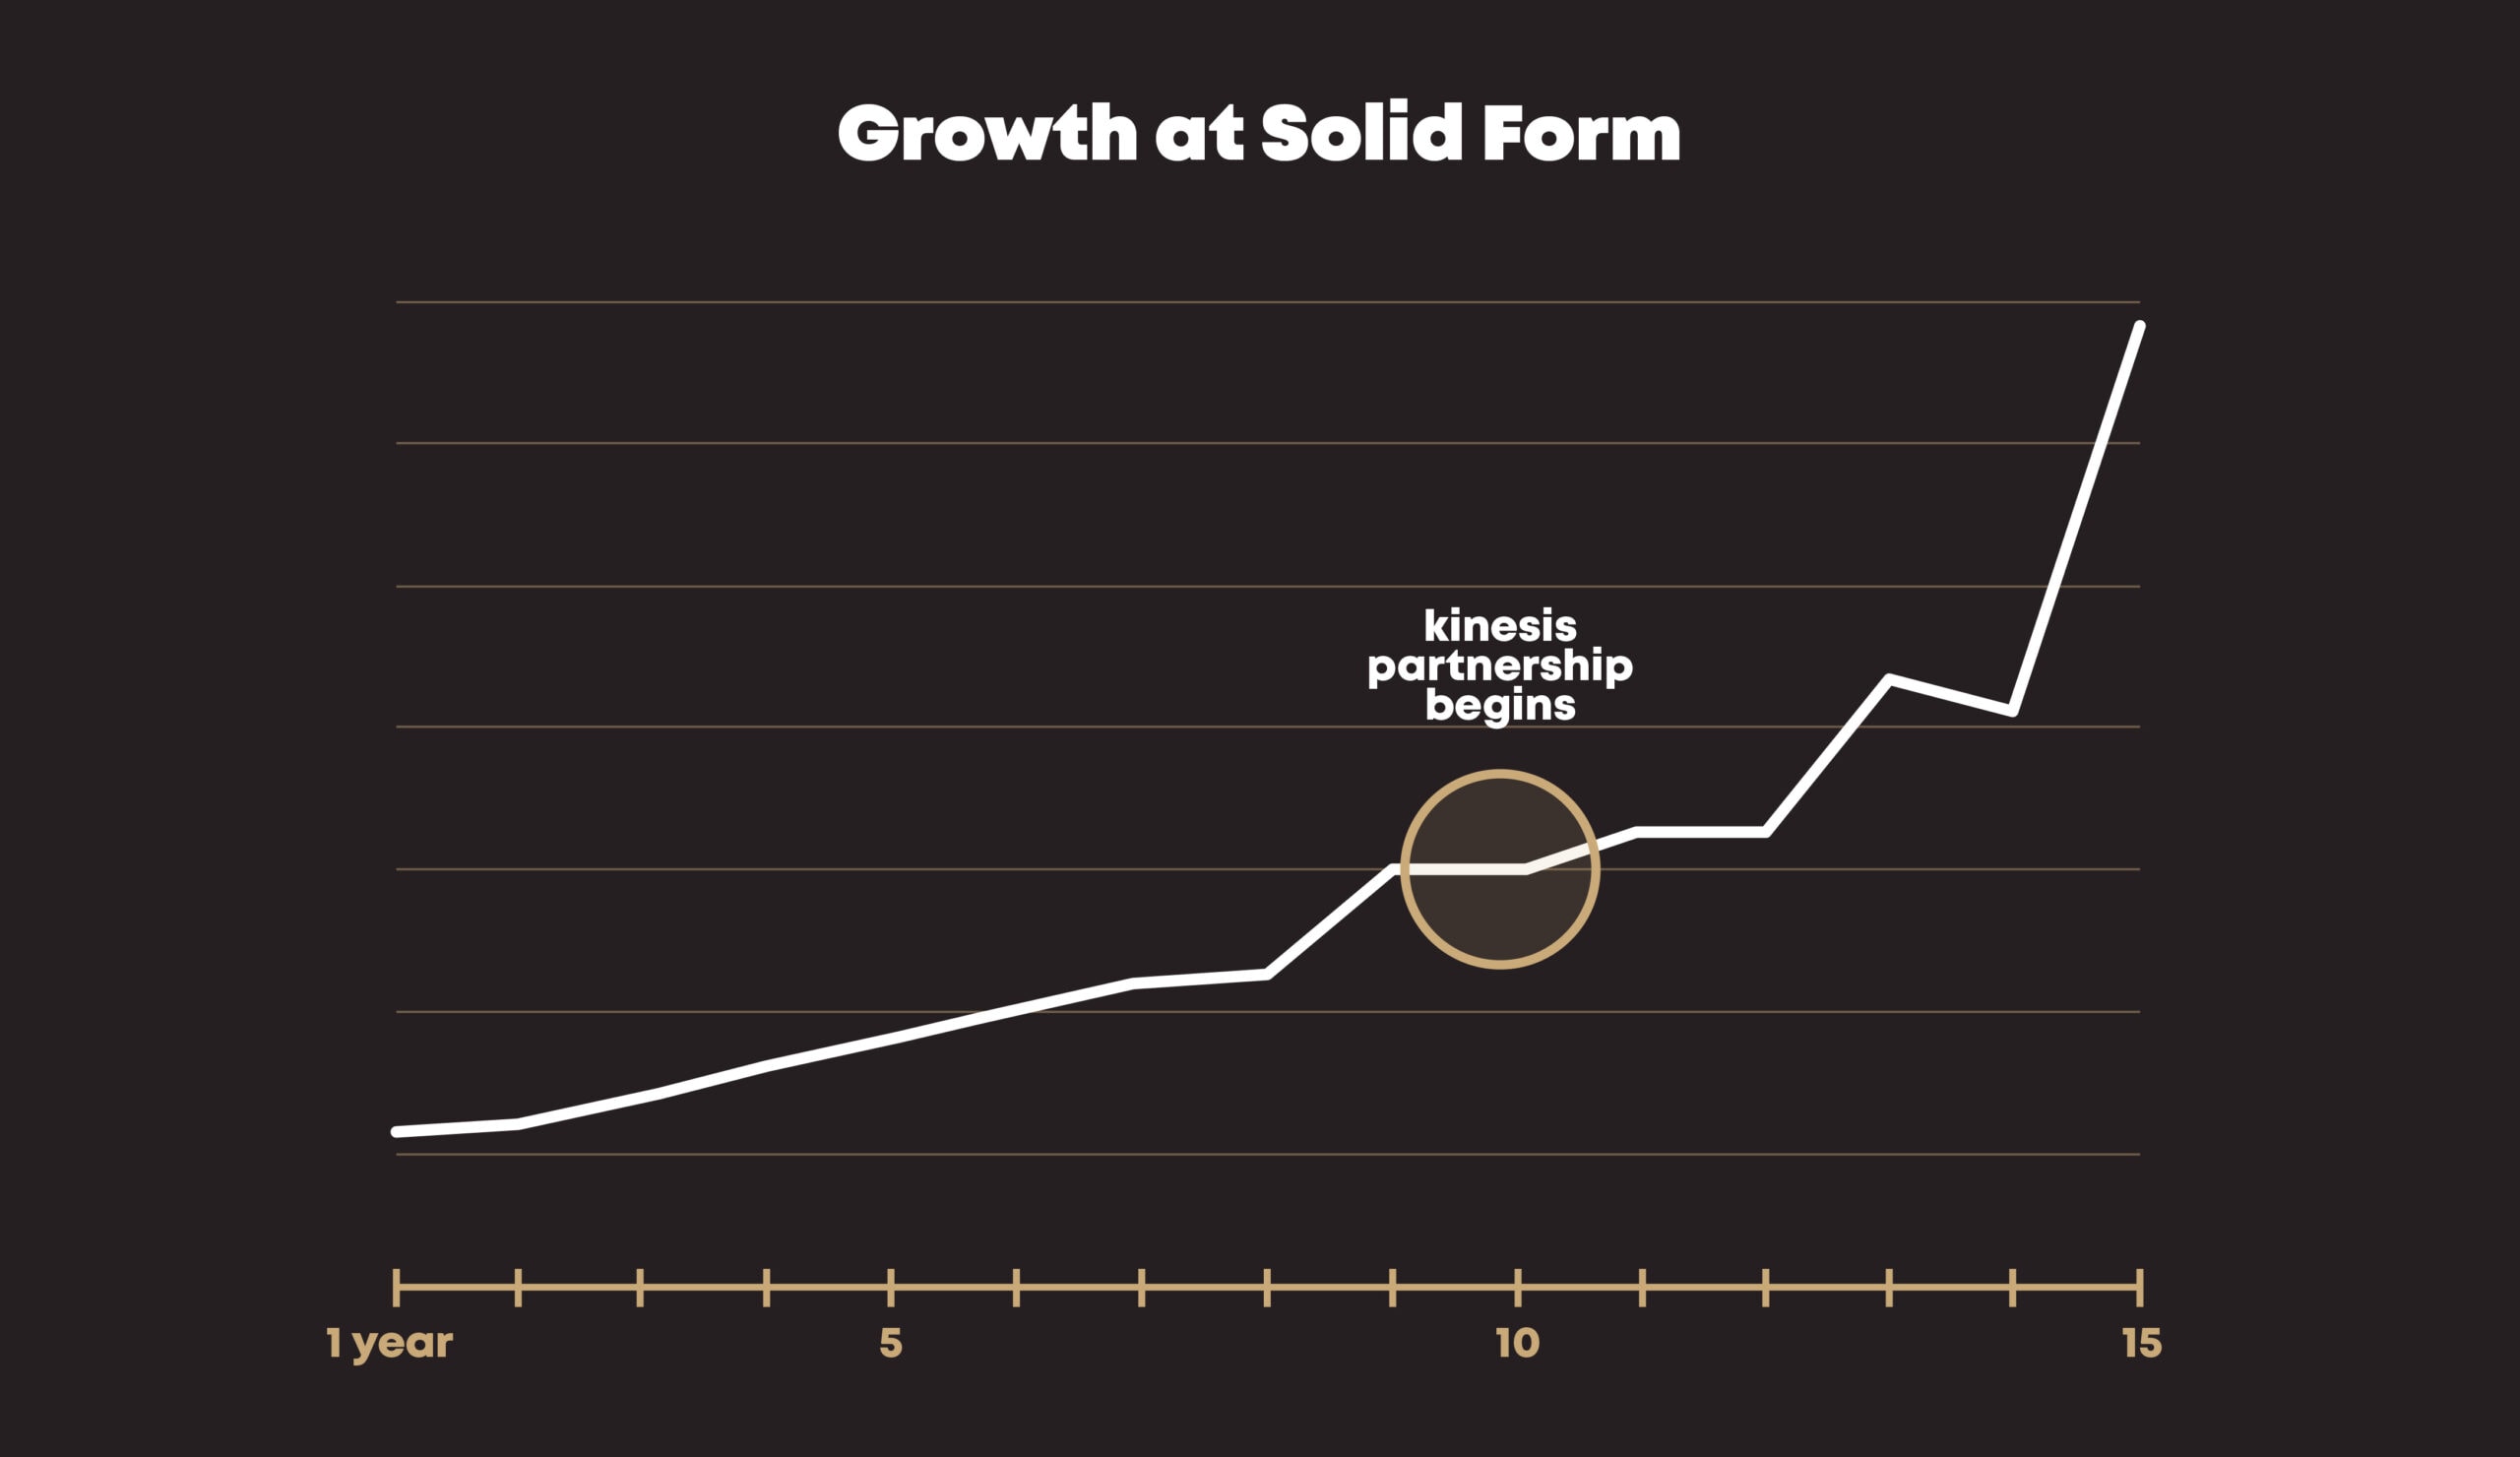 Chart with title: "Growth at Solid Form" showing sharp increase after Kinesis started working with Solid Form